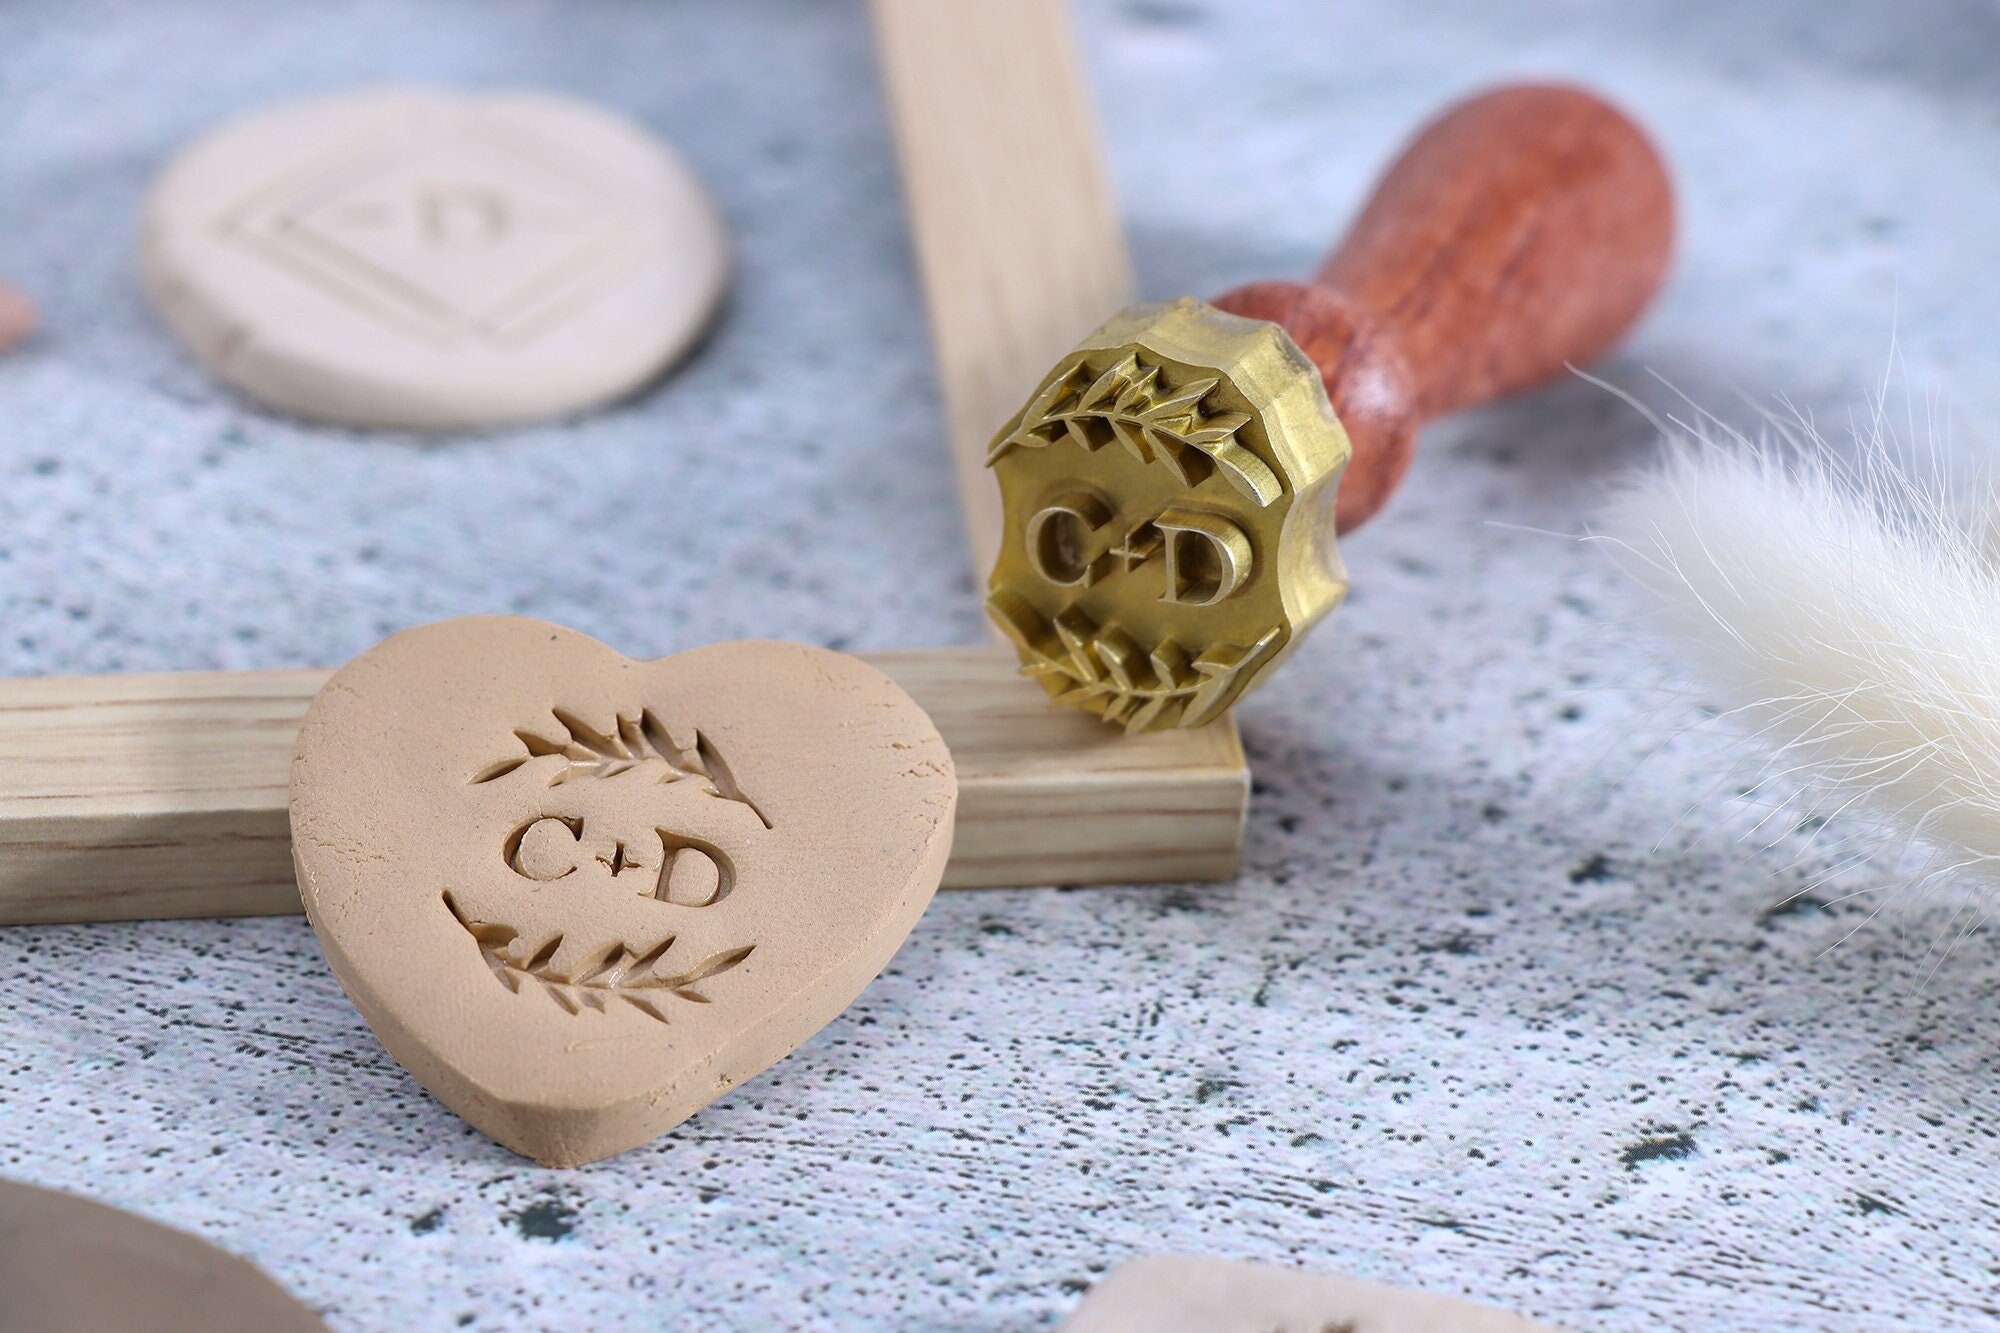 Custom Initials Clay Stamp, Custom Monogram Pottery Stamp, Personalizable  Stamp for Pottery, Pottery Custom Stamp 1231130320 